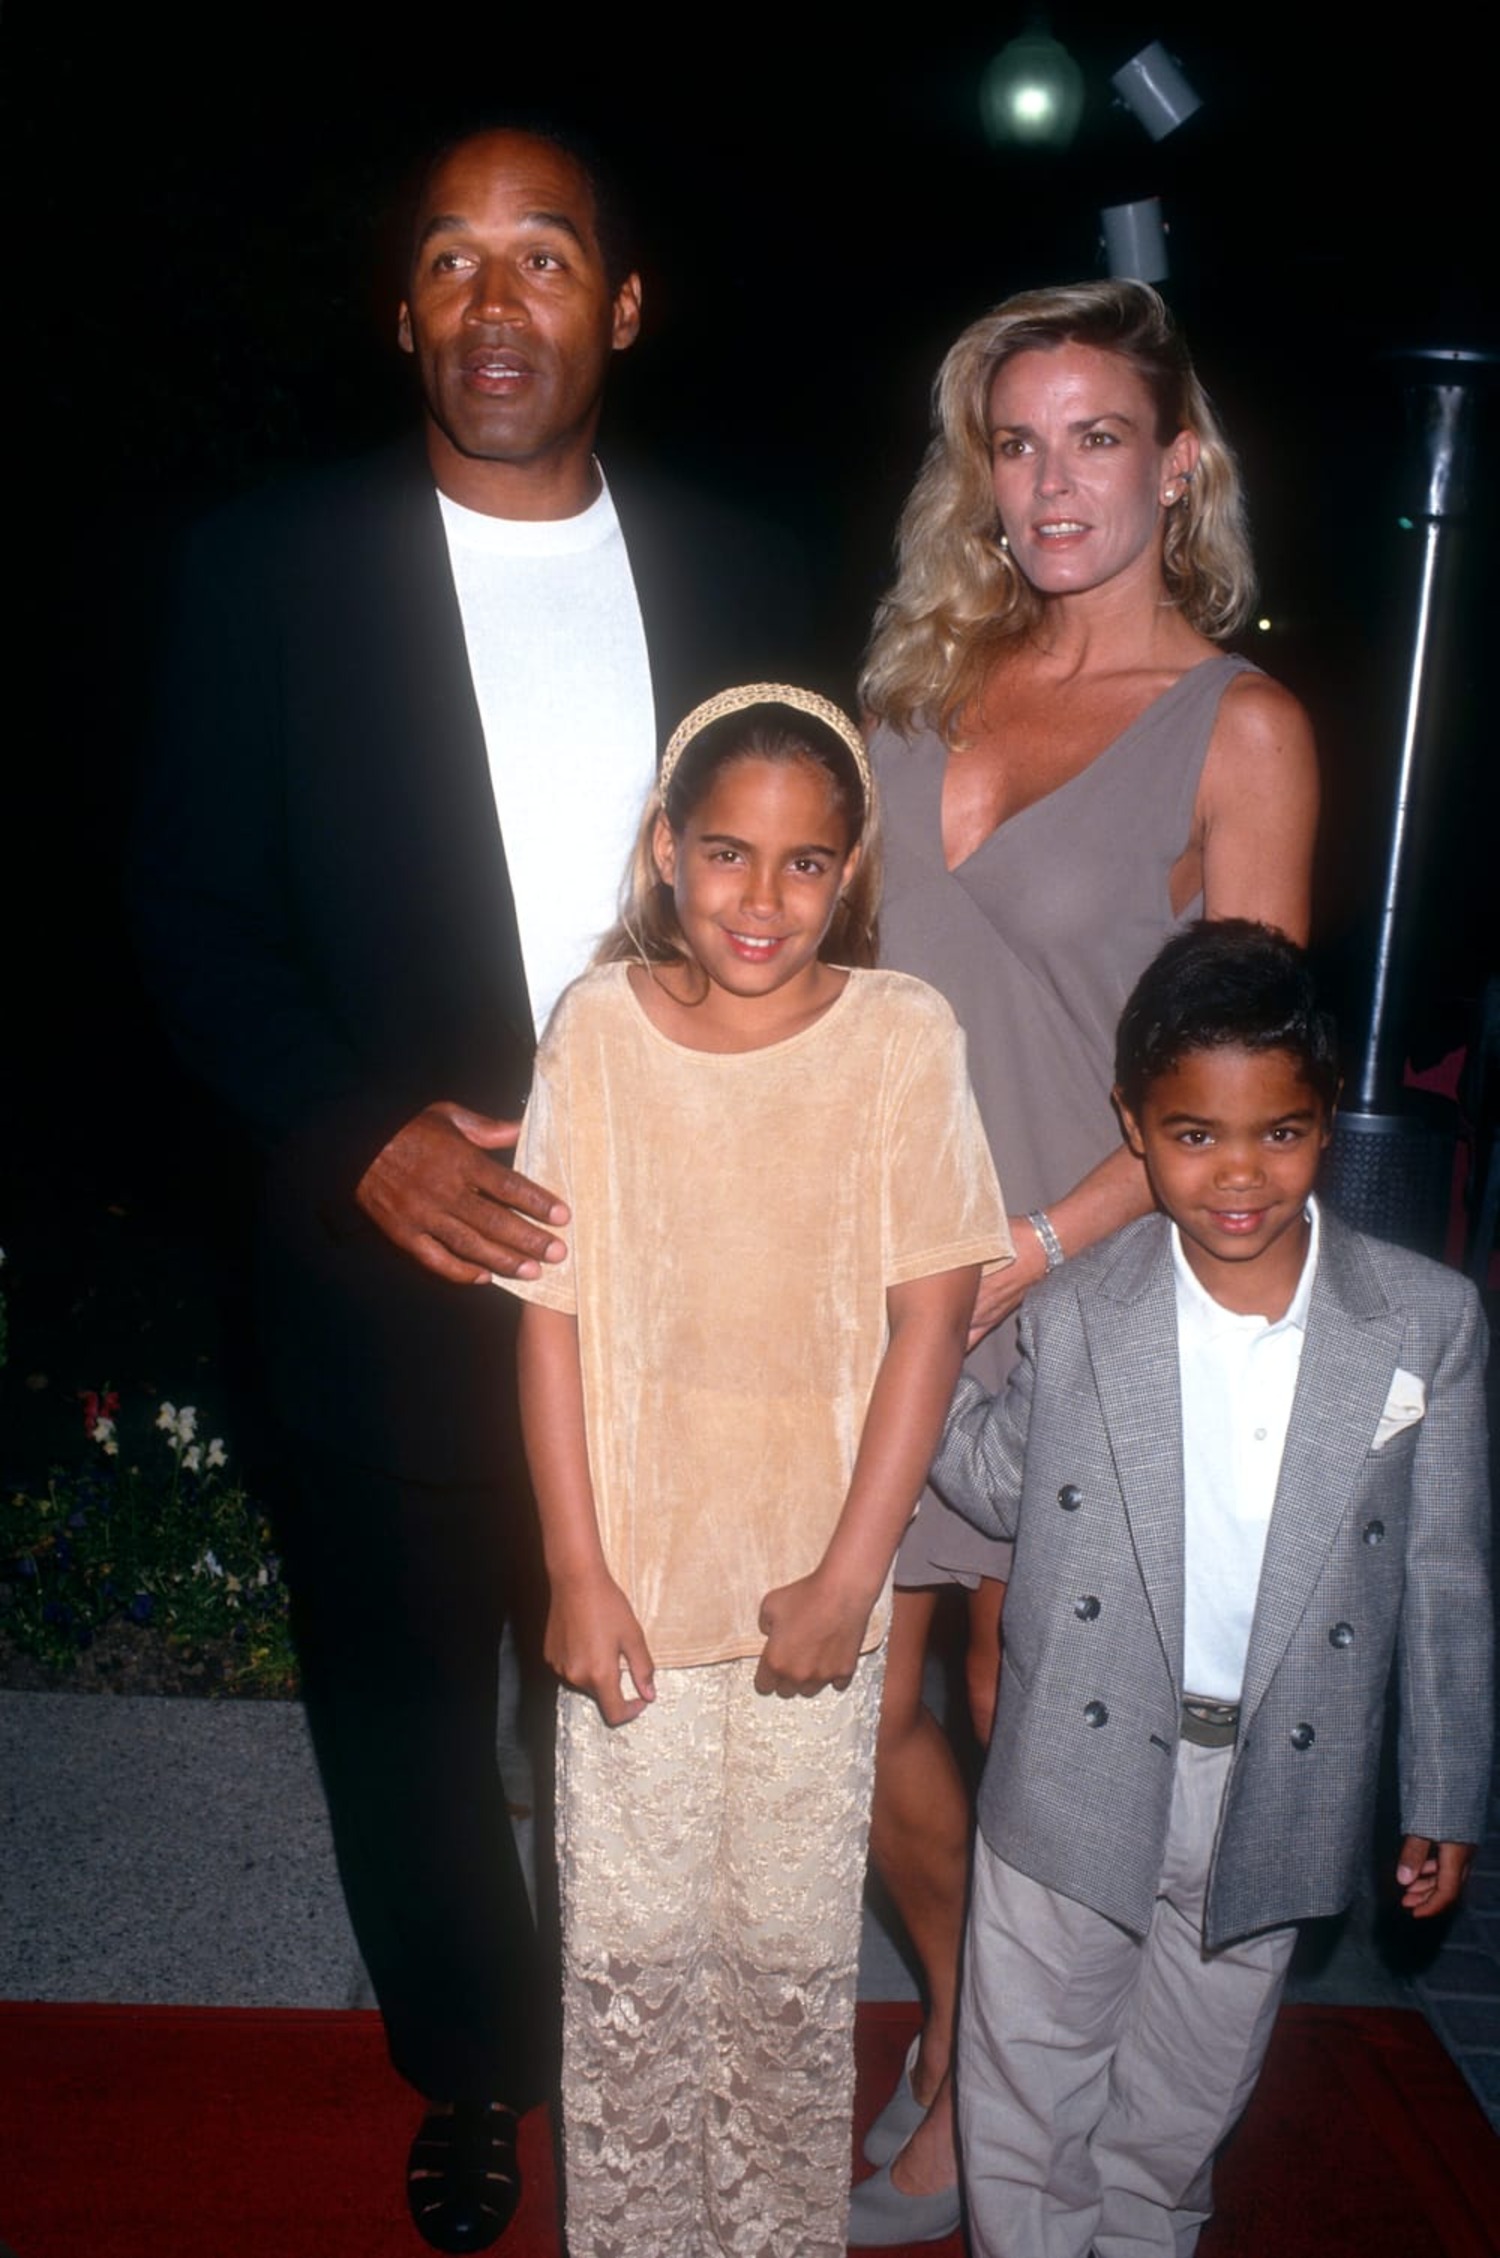 OJ Simpson and Nicole Brown with their kids, Sydney Simpson and Justine Simpson